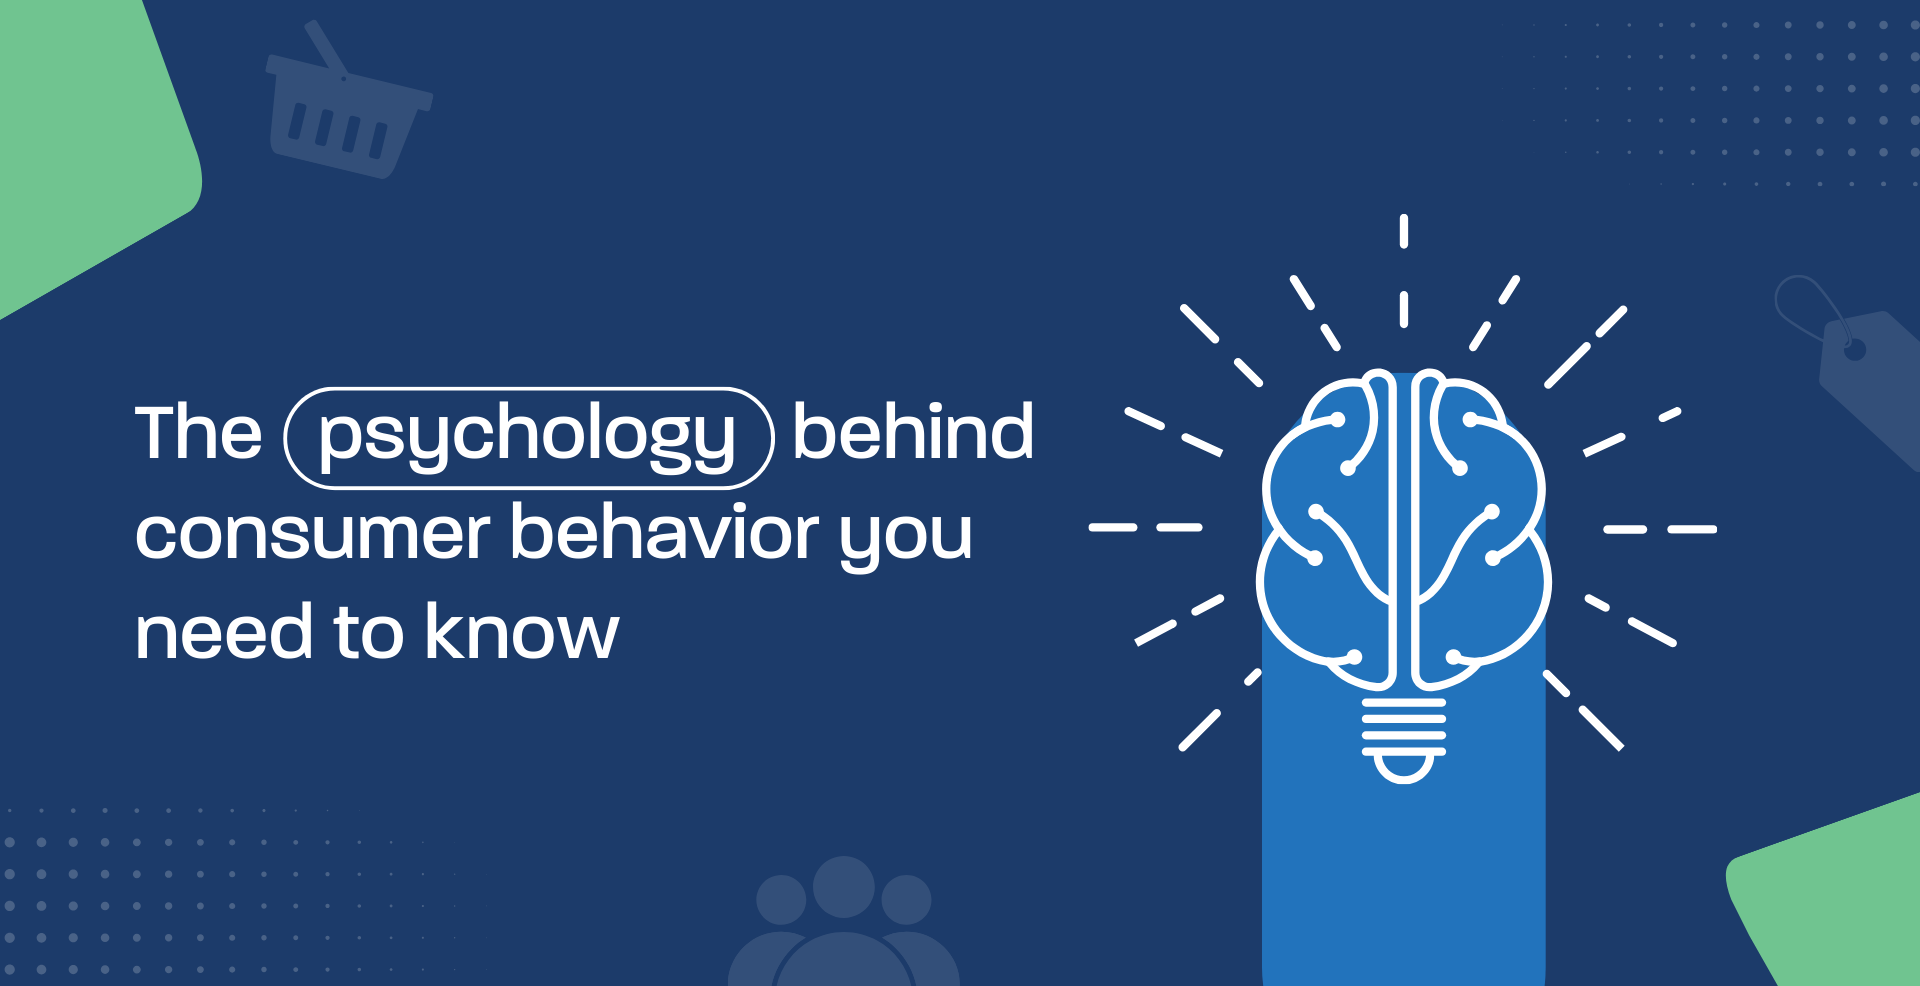 The psychology behind consumer behavior you need to know